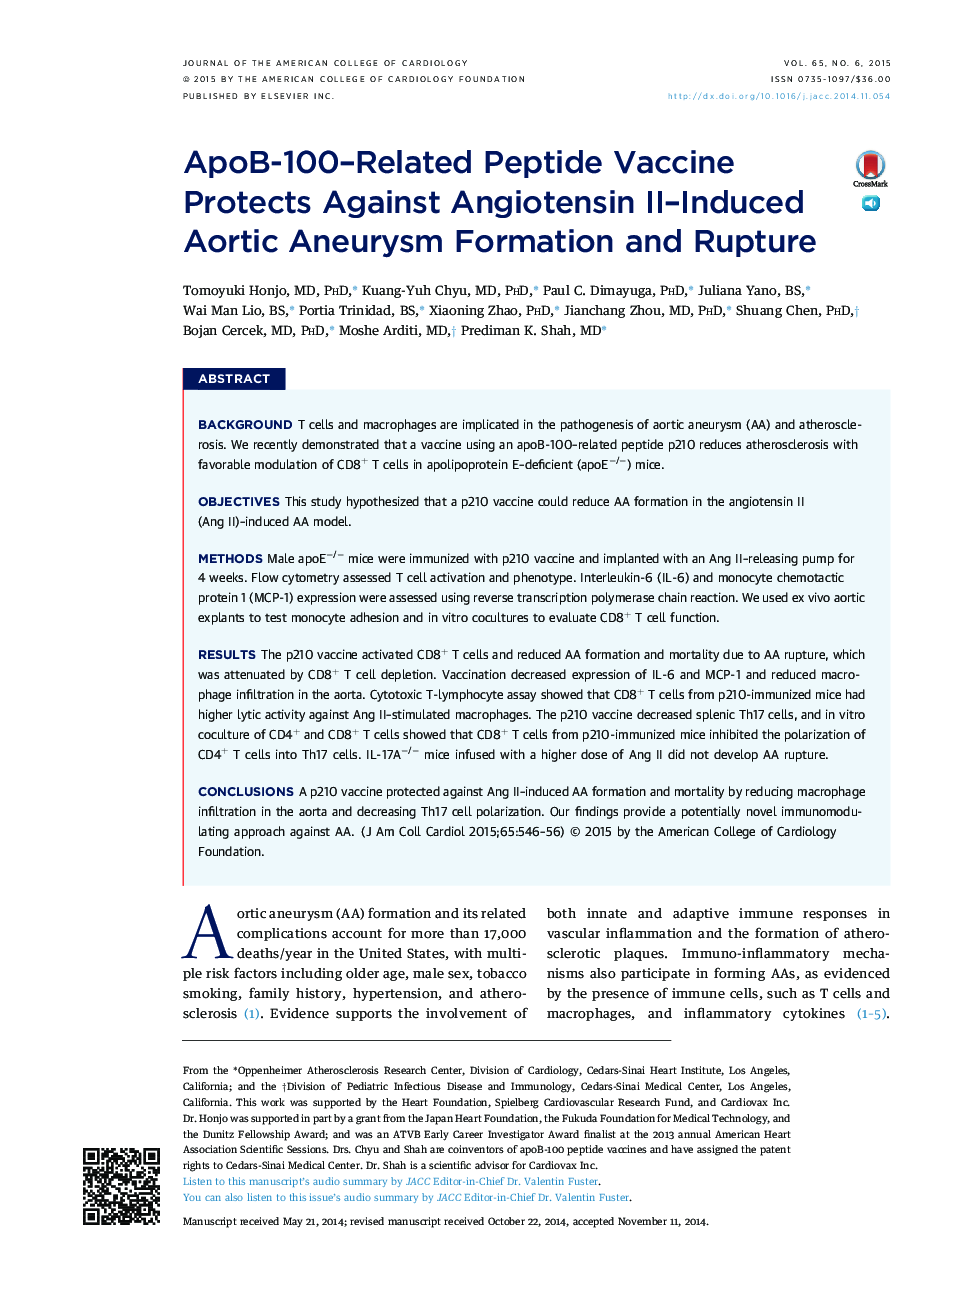 ApoB-100-Related Peptide Vaccine Protects Against Angiotensin II-Induced Aortic Aneurysm Formation and Rupture